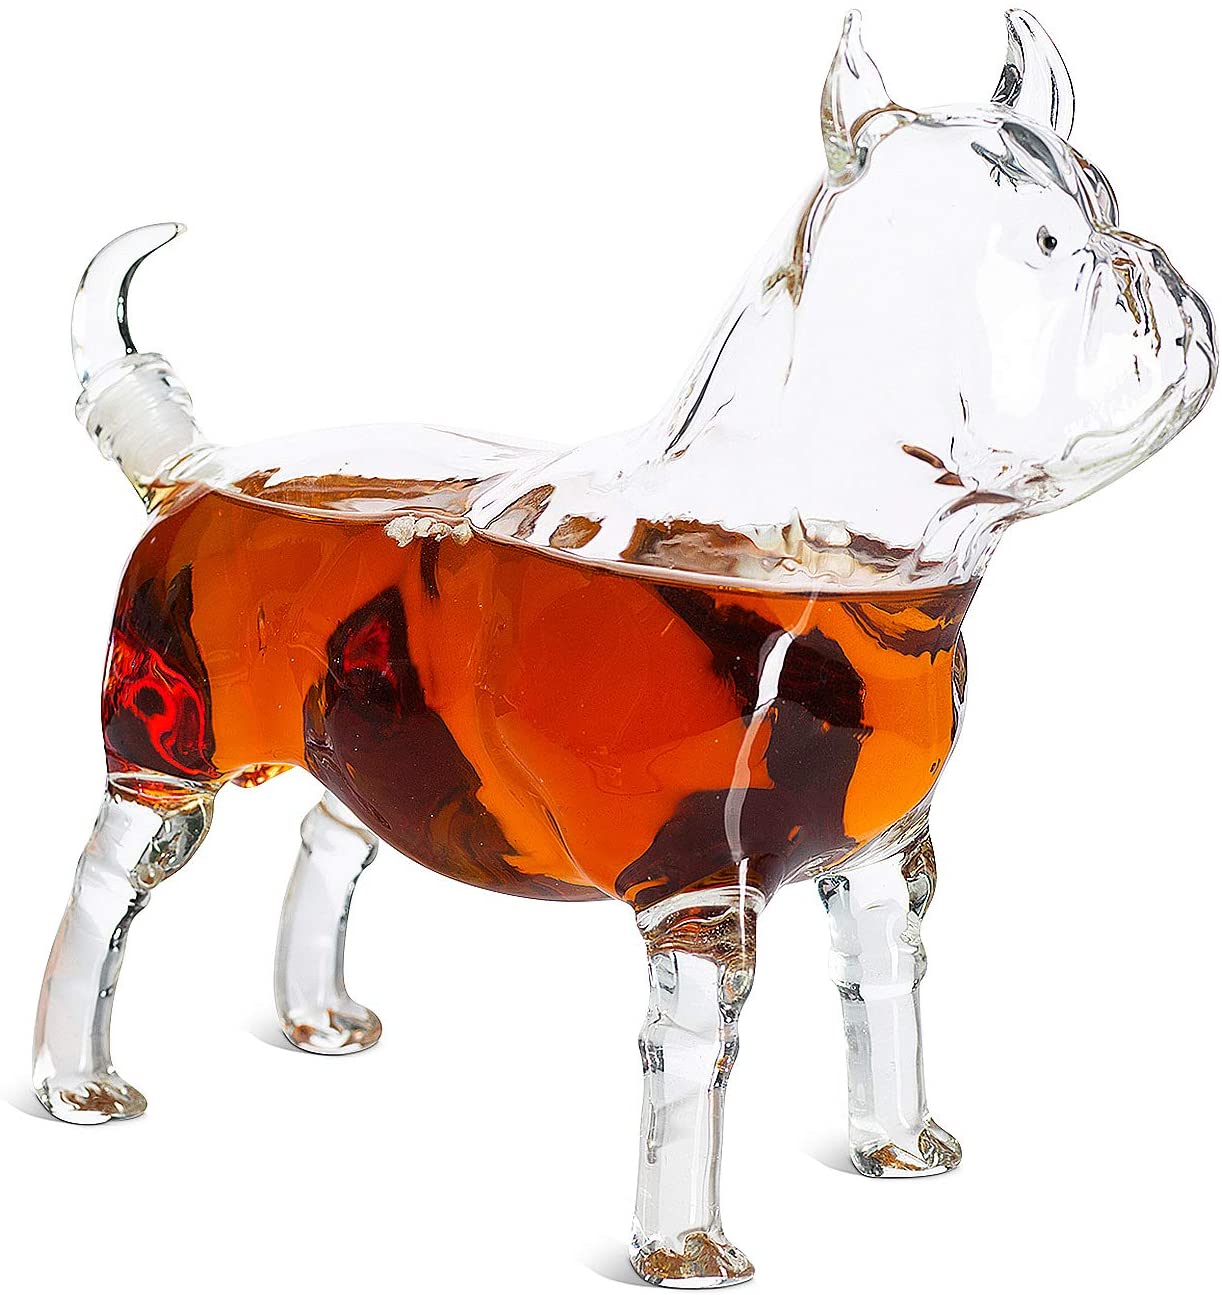 French Bull Dog - Pug Animal Whiskey and Wine Decanter Liquor Lux - 500ml - Whiskey, Wine Scotch or Liquor Decanter